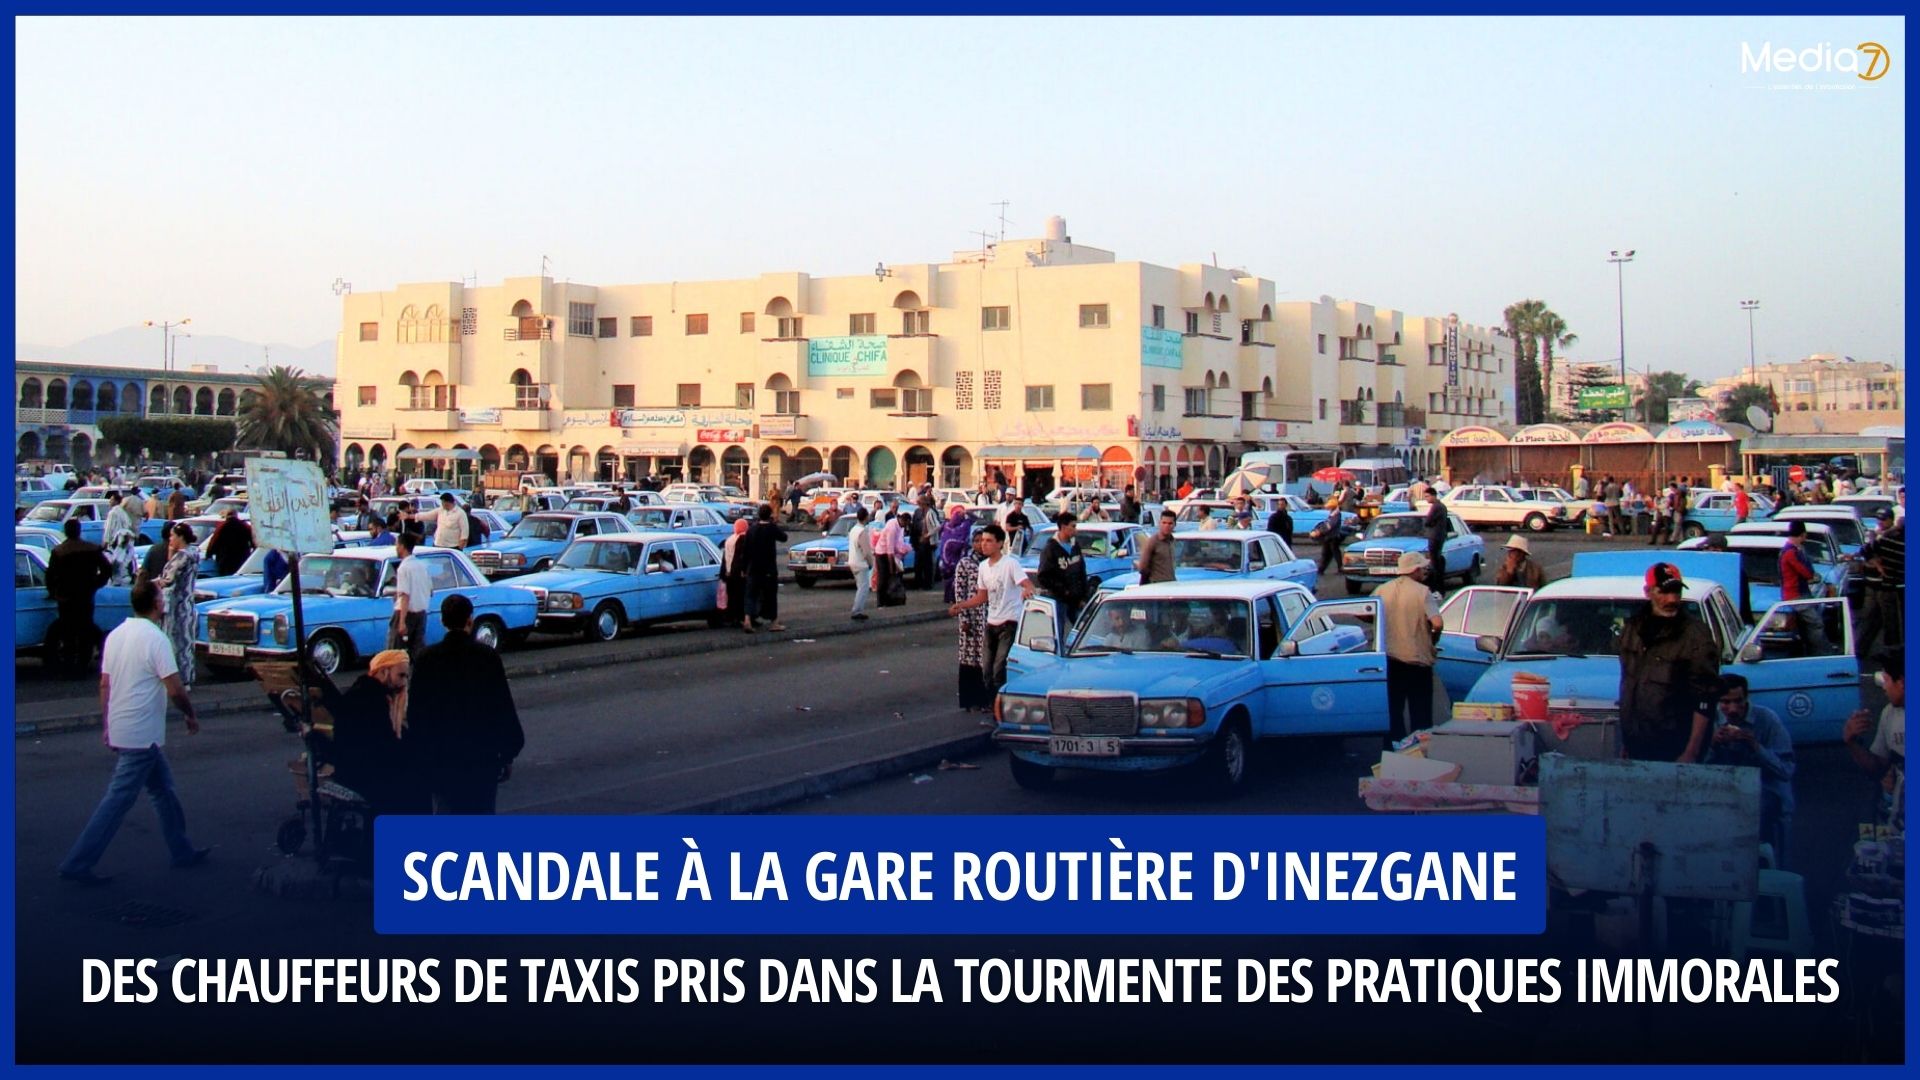 Scandal at Inezgane Bus Station: Taxi Drivers Caught in the Turmoil of Immoral Practices - Media7